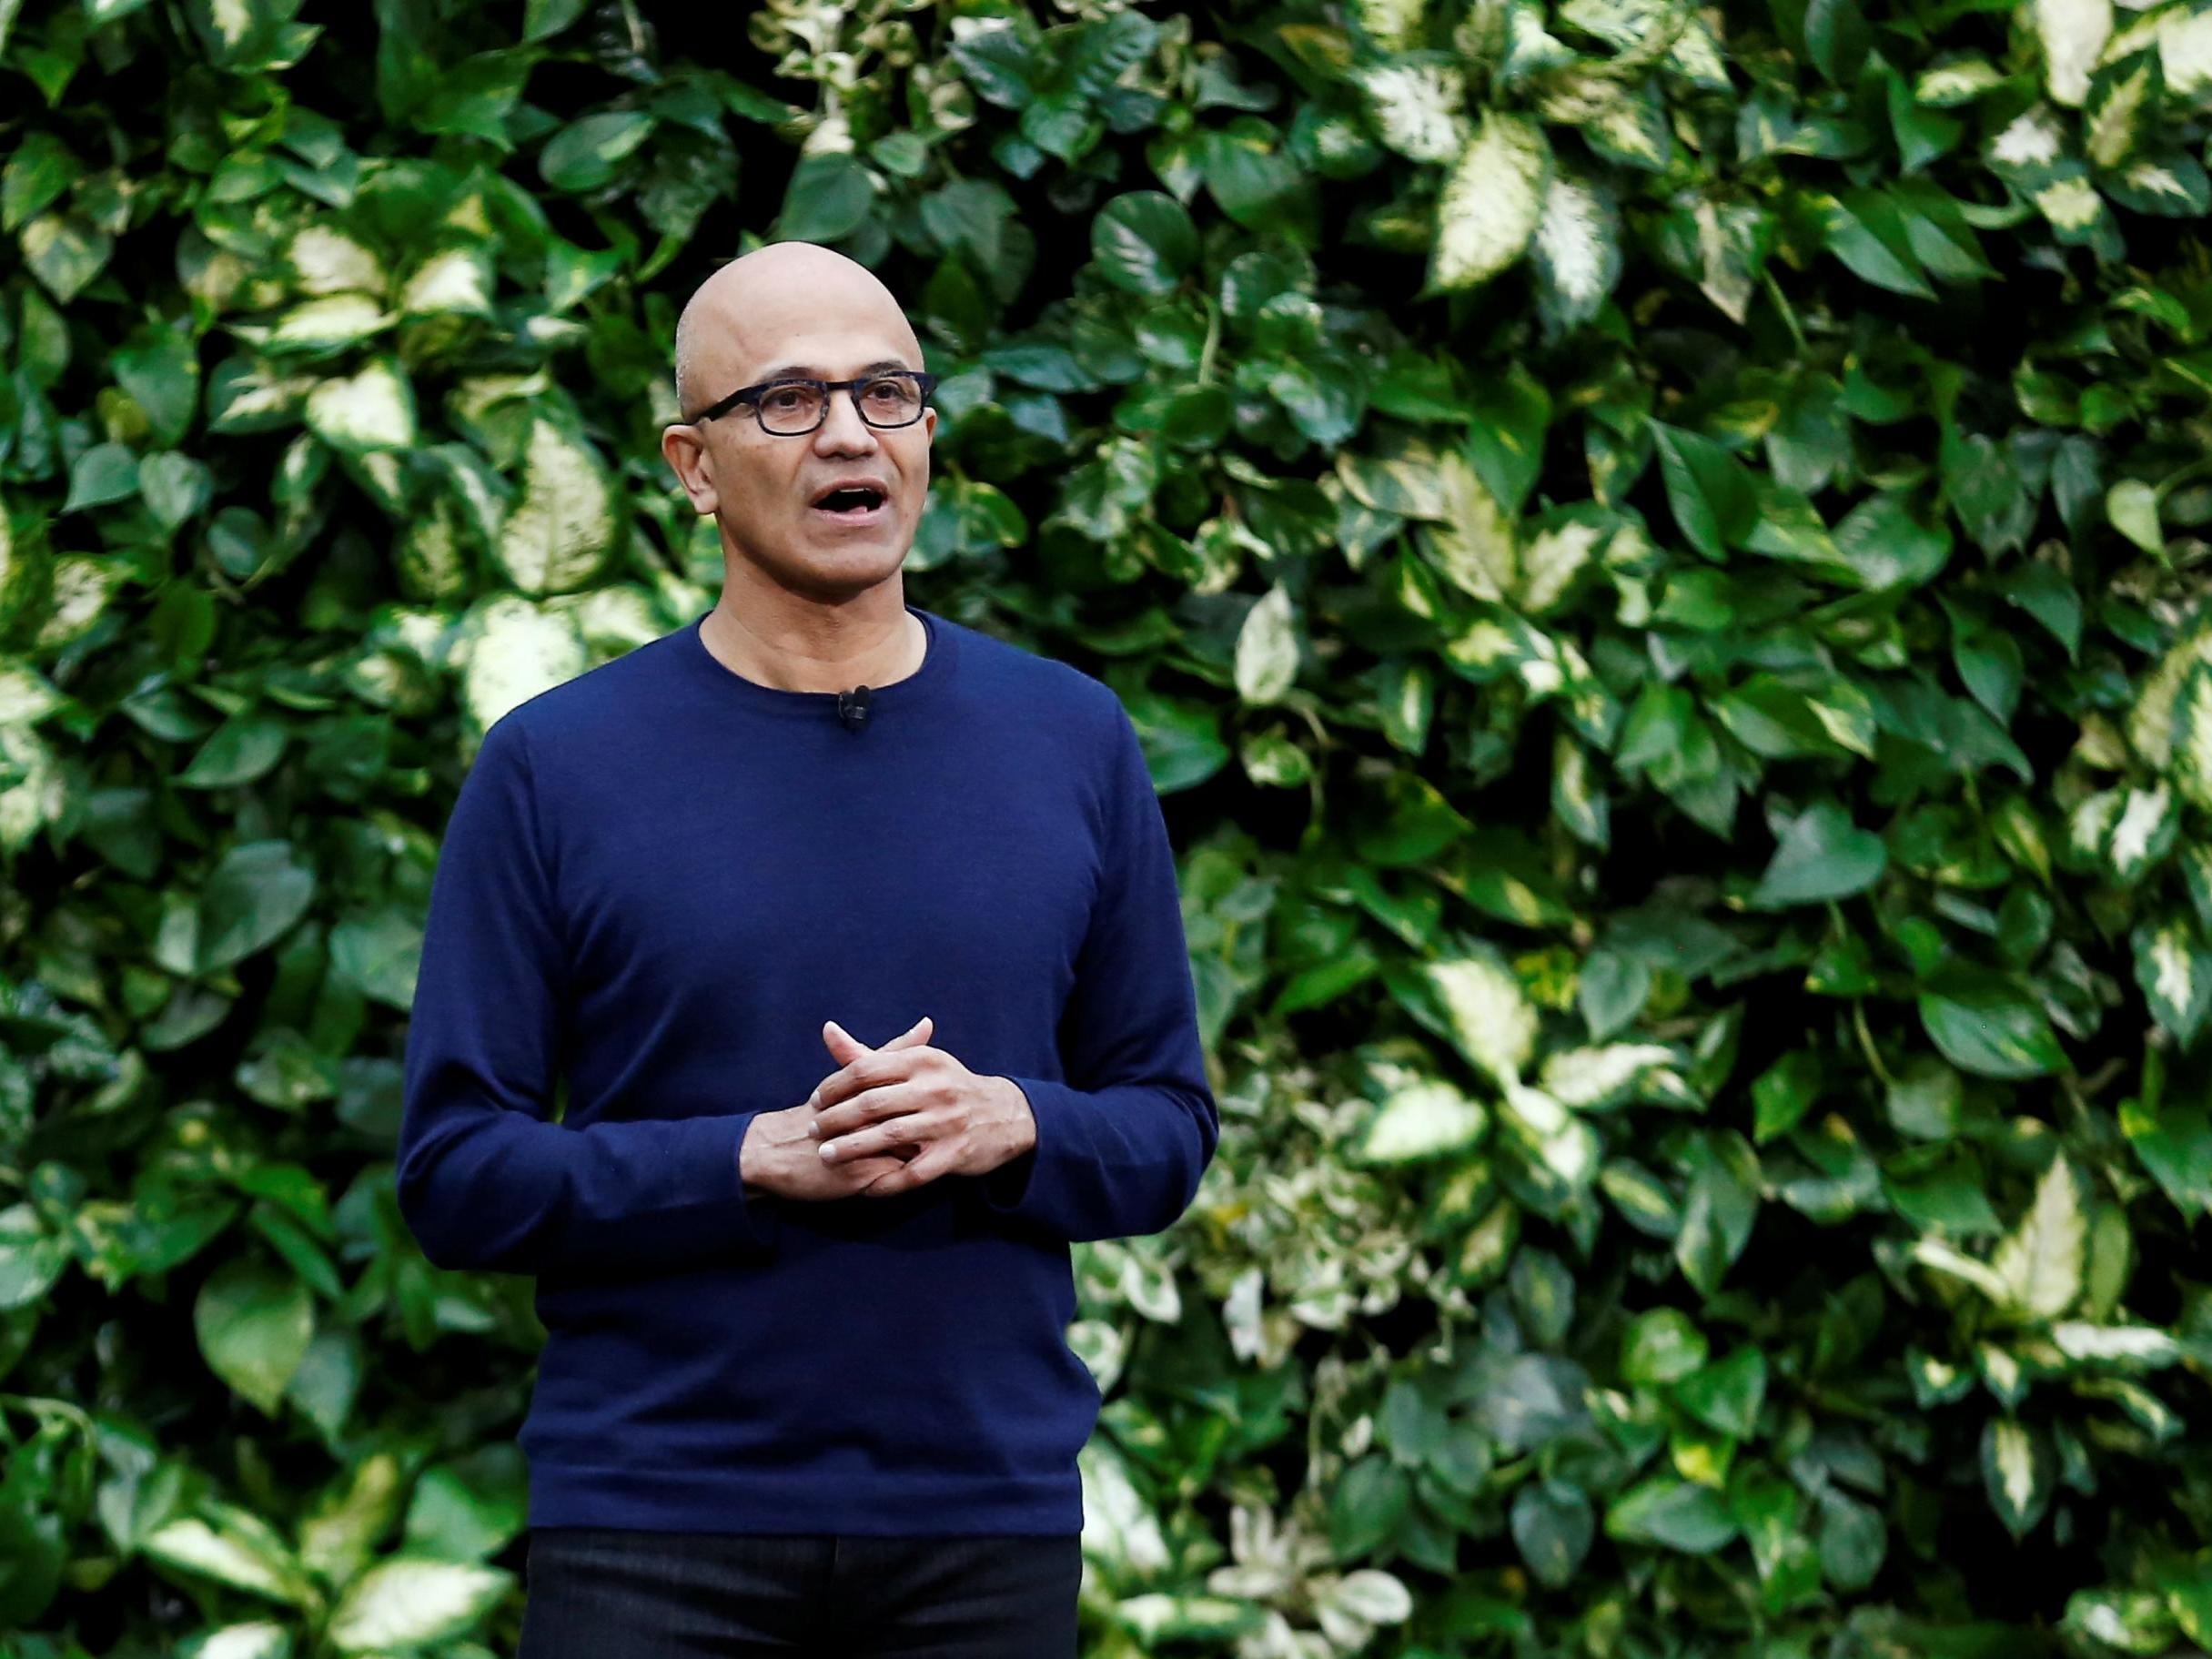 Microsoft CEO Satya Nadella speaks as Microsoft announces plans to be carbon negative by 2030 and to negate all the direct carbon emissions ever made by the company by 2050